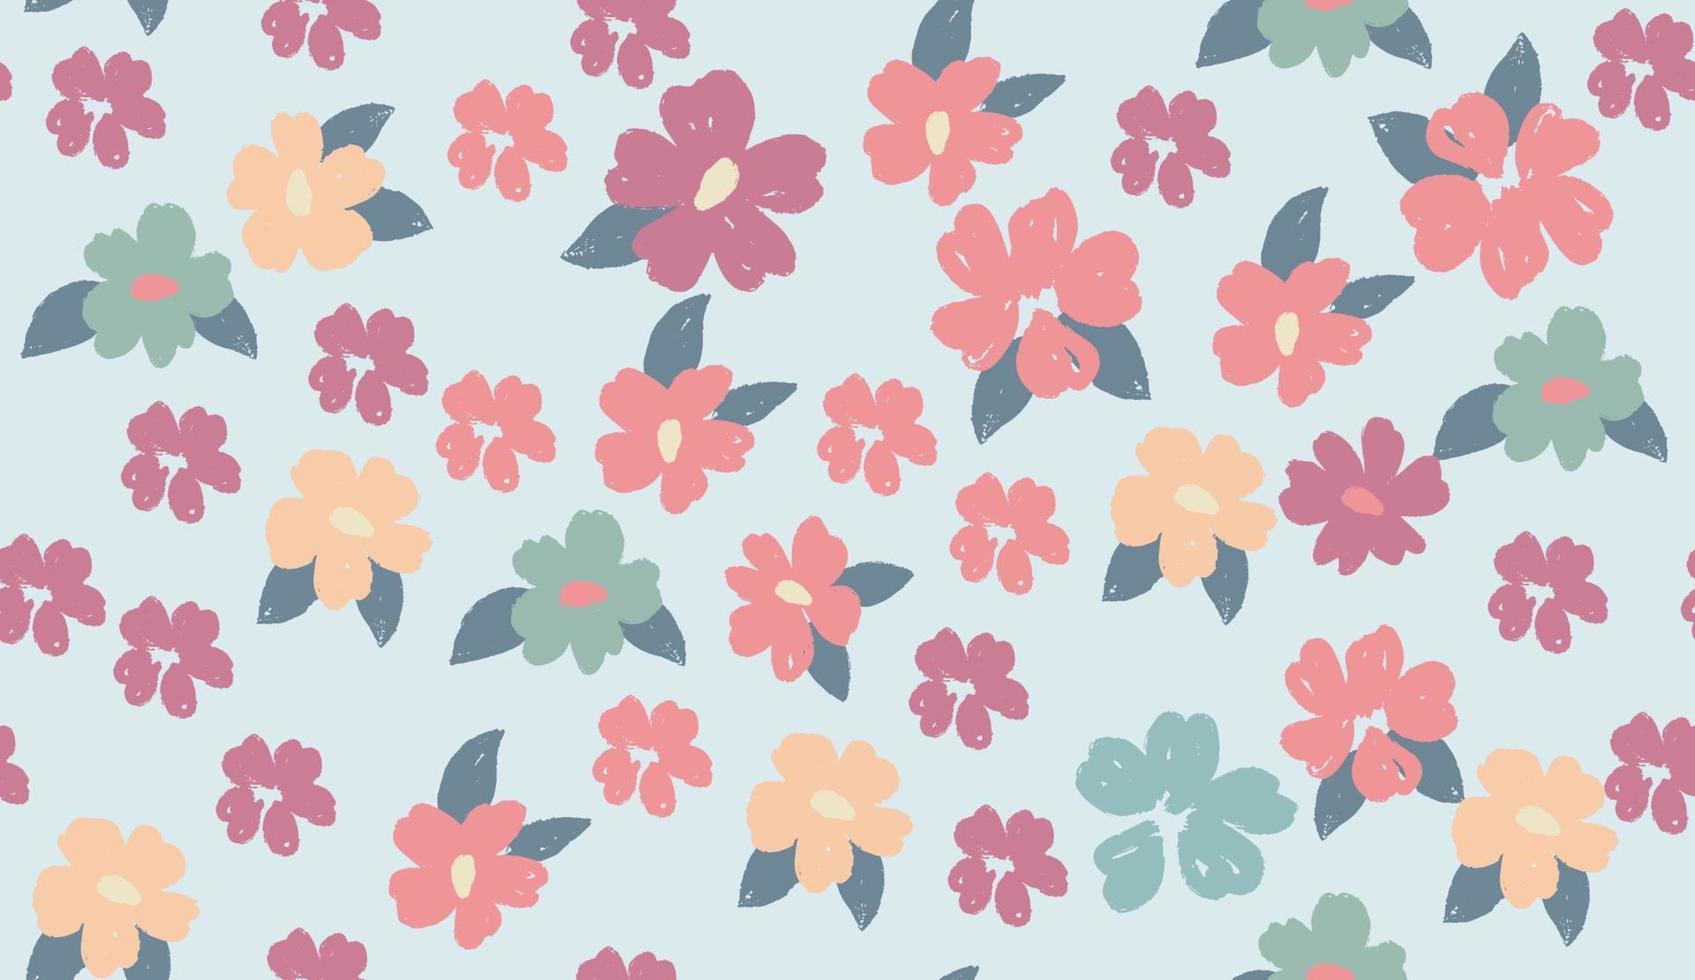 Floral background for textile, swimsuit, wallpaper, pattern covers, surface, gift wrap. vector